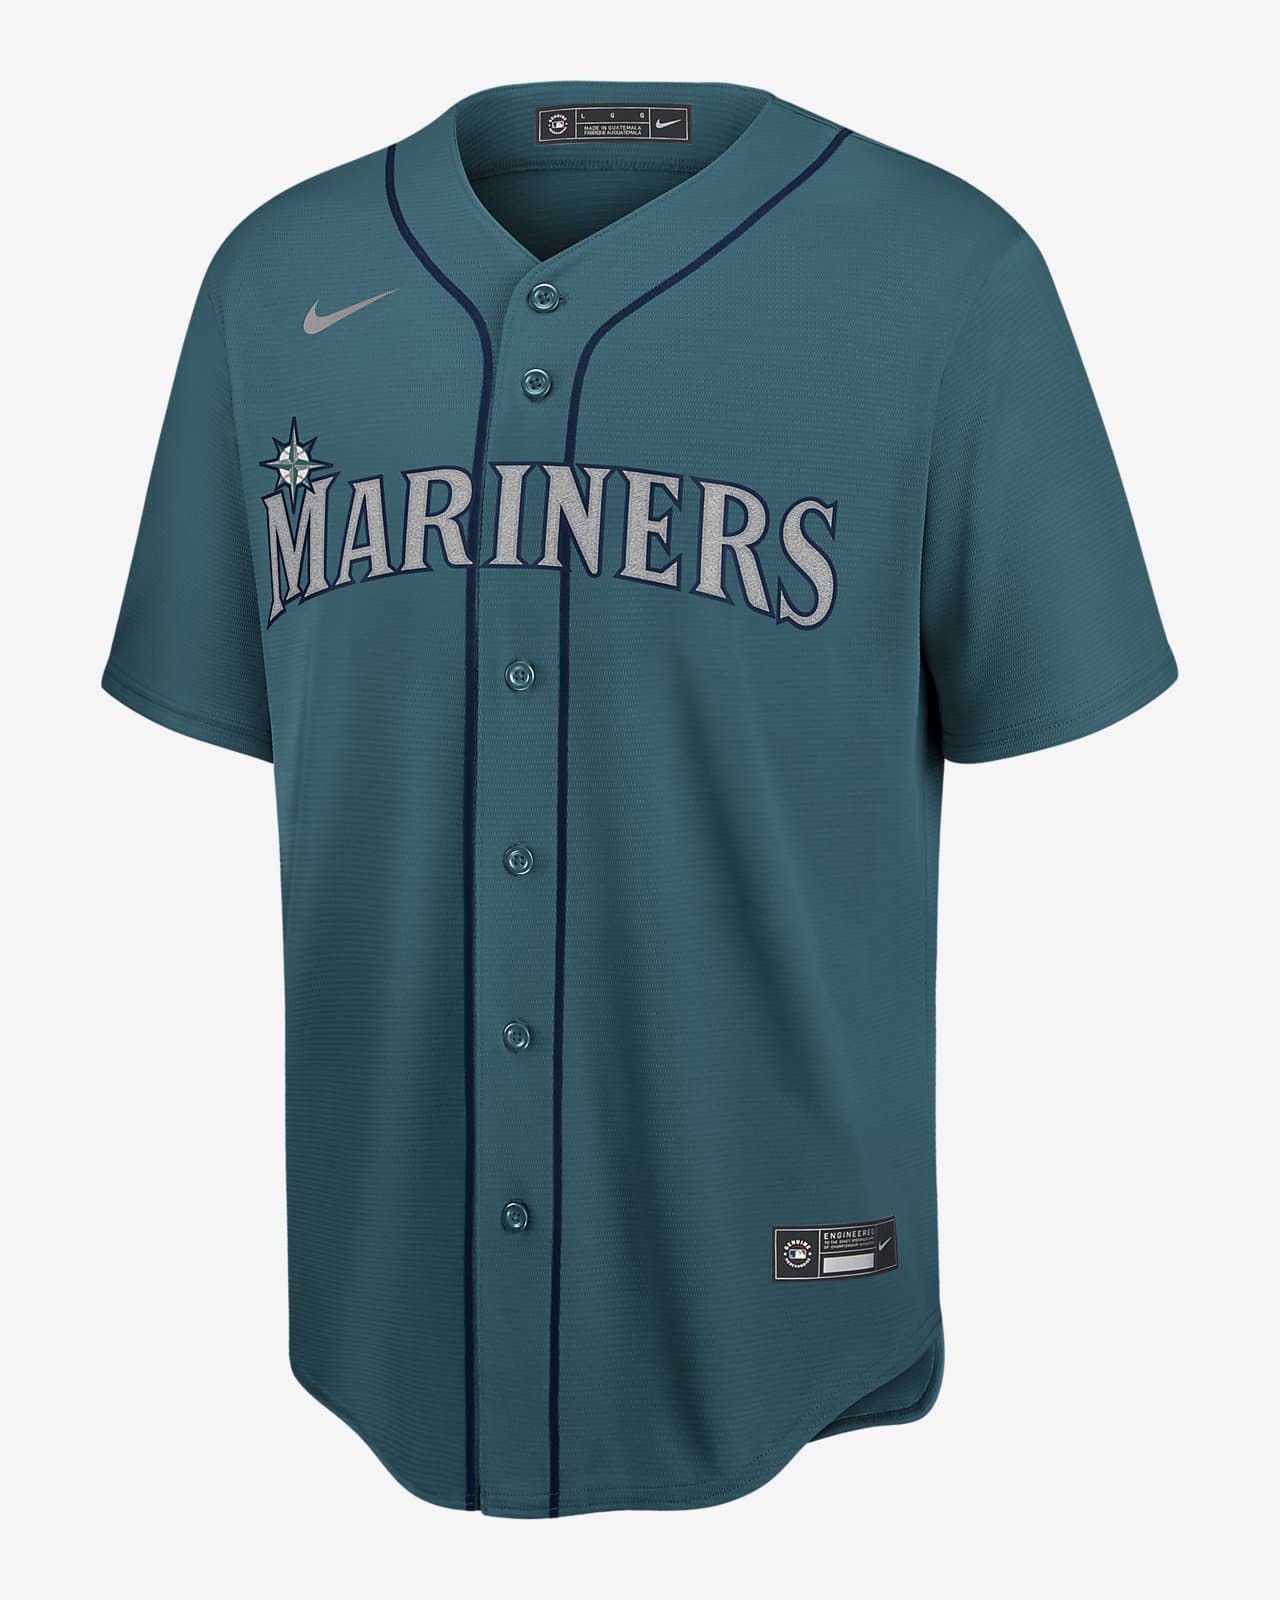 mariners gear store